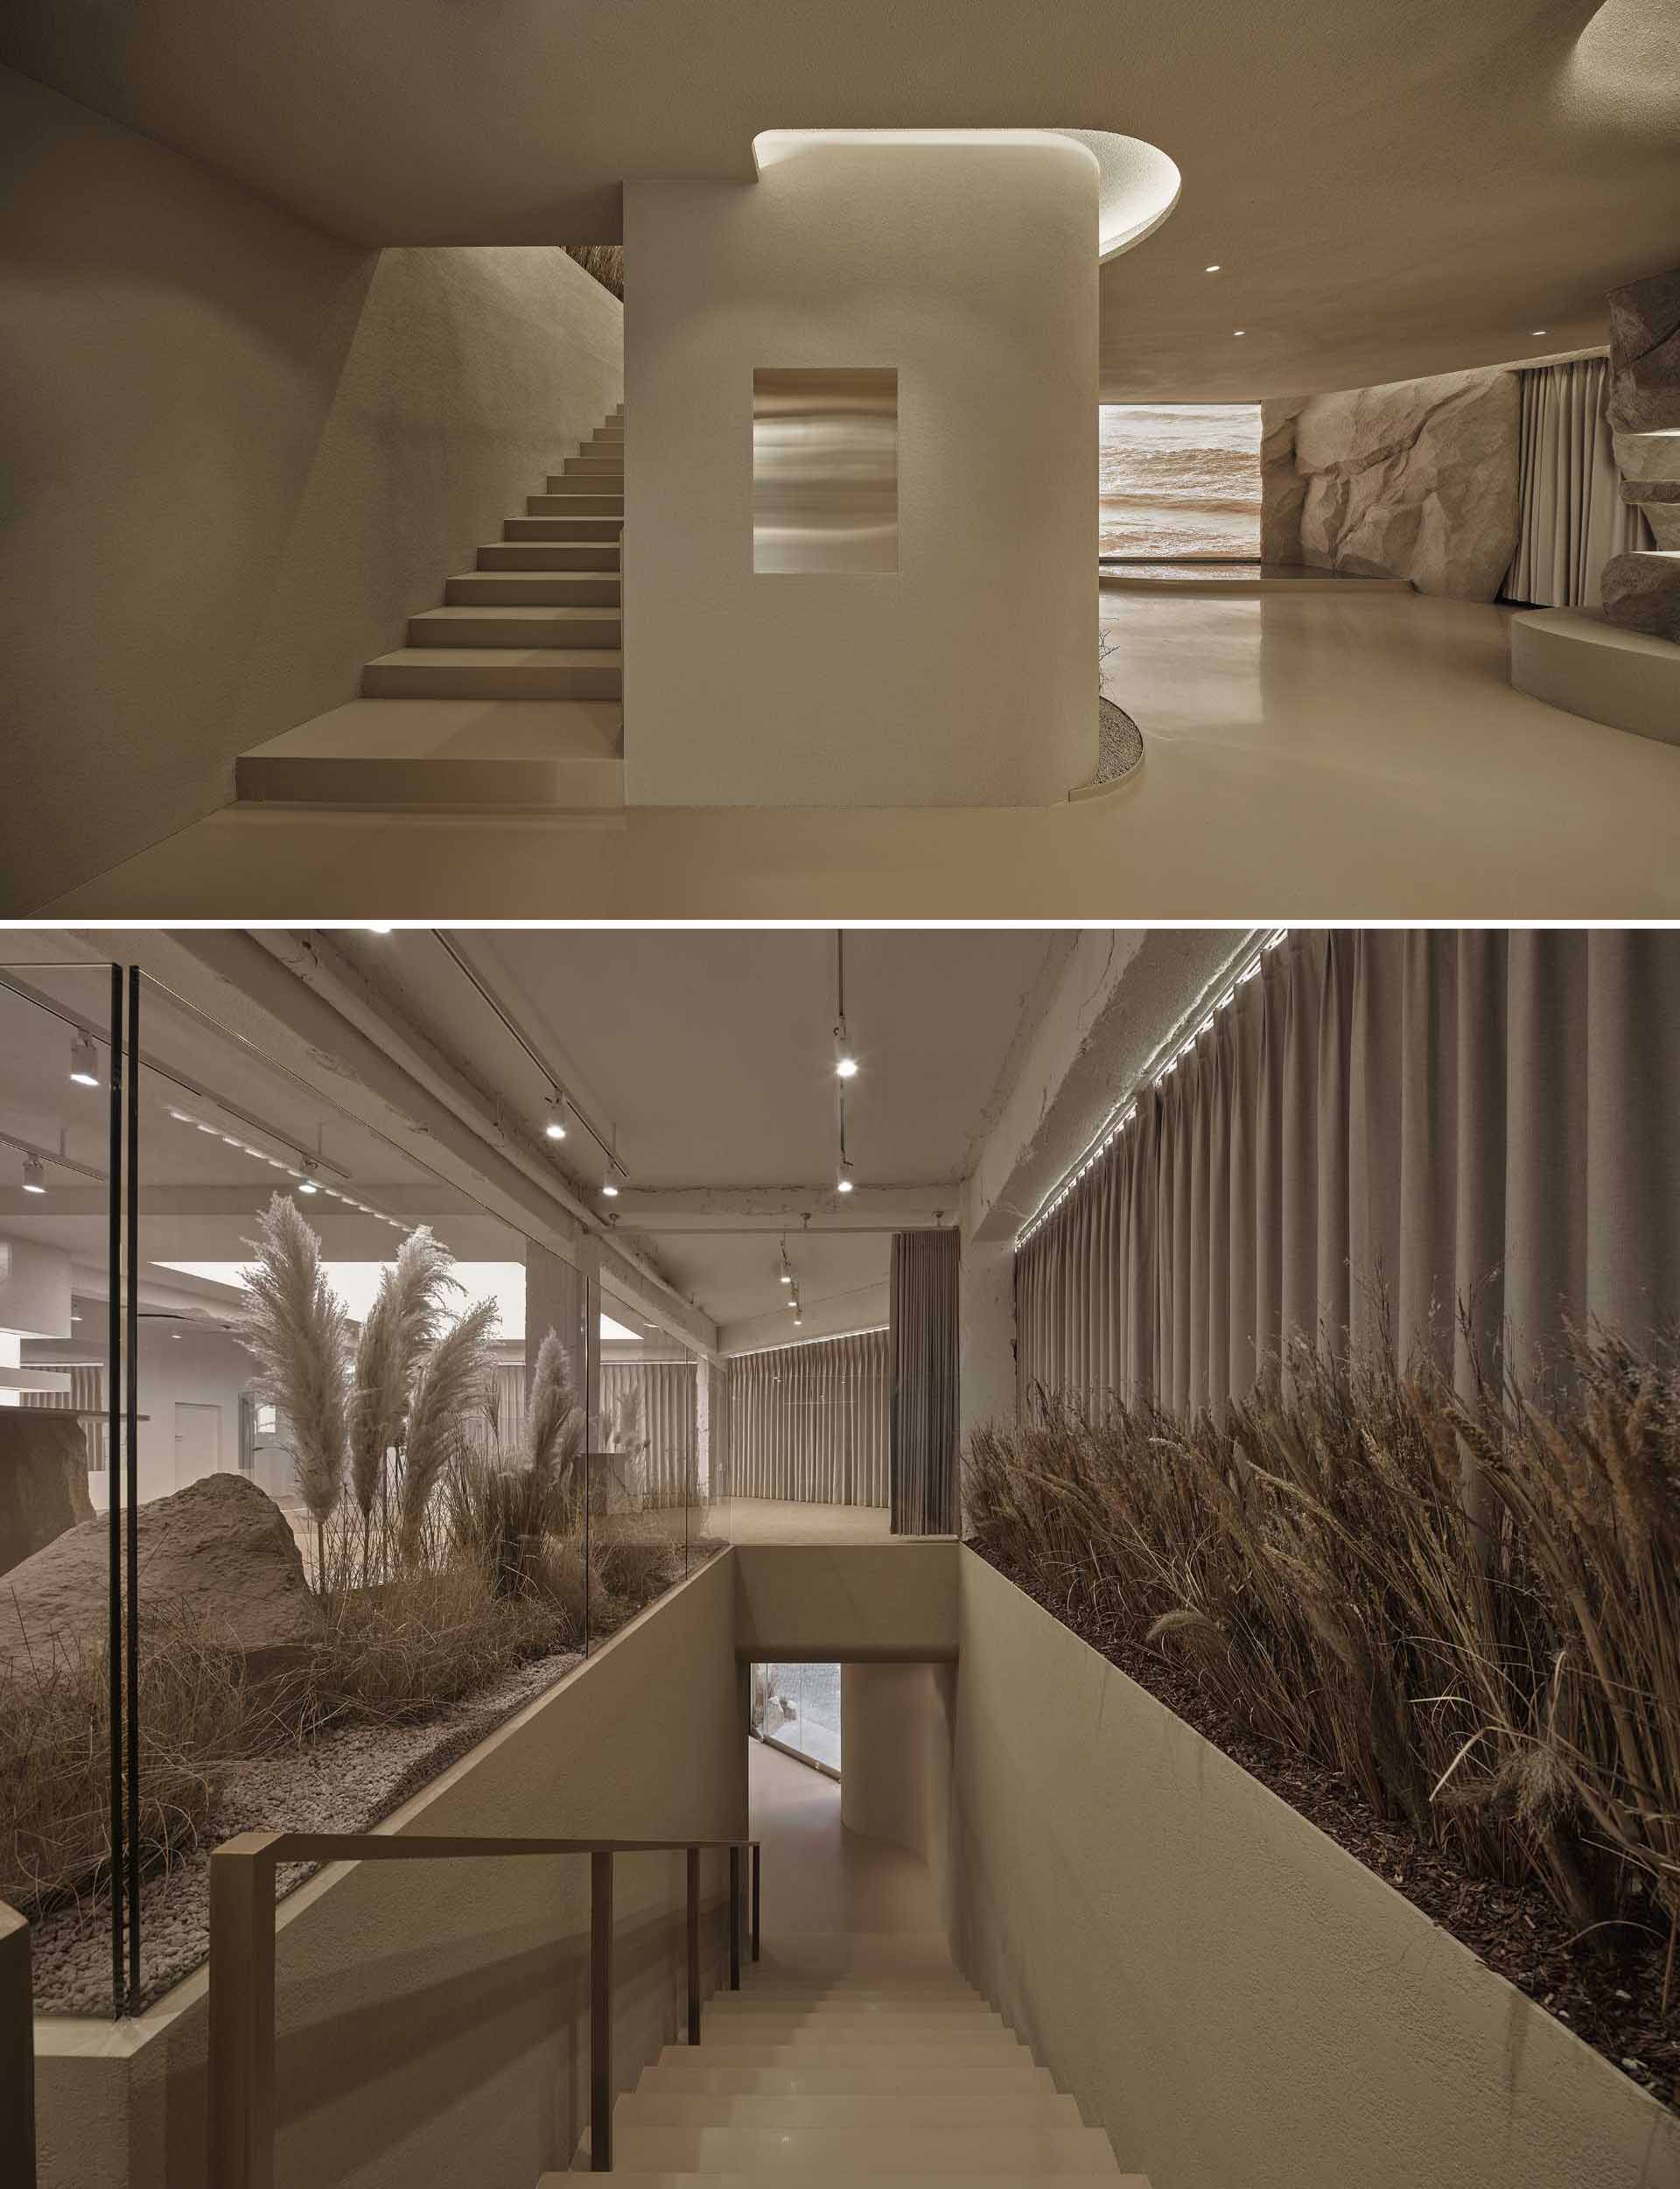 A modern skincare boutique inspired by "untouched nature" includes rock formations, warm brown tones, and a reed forest.